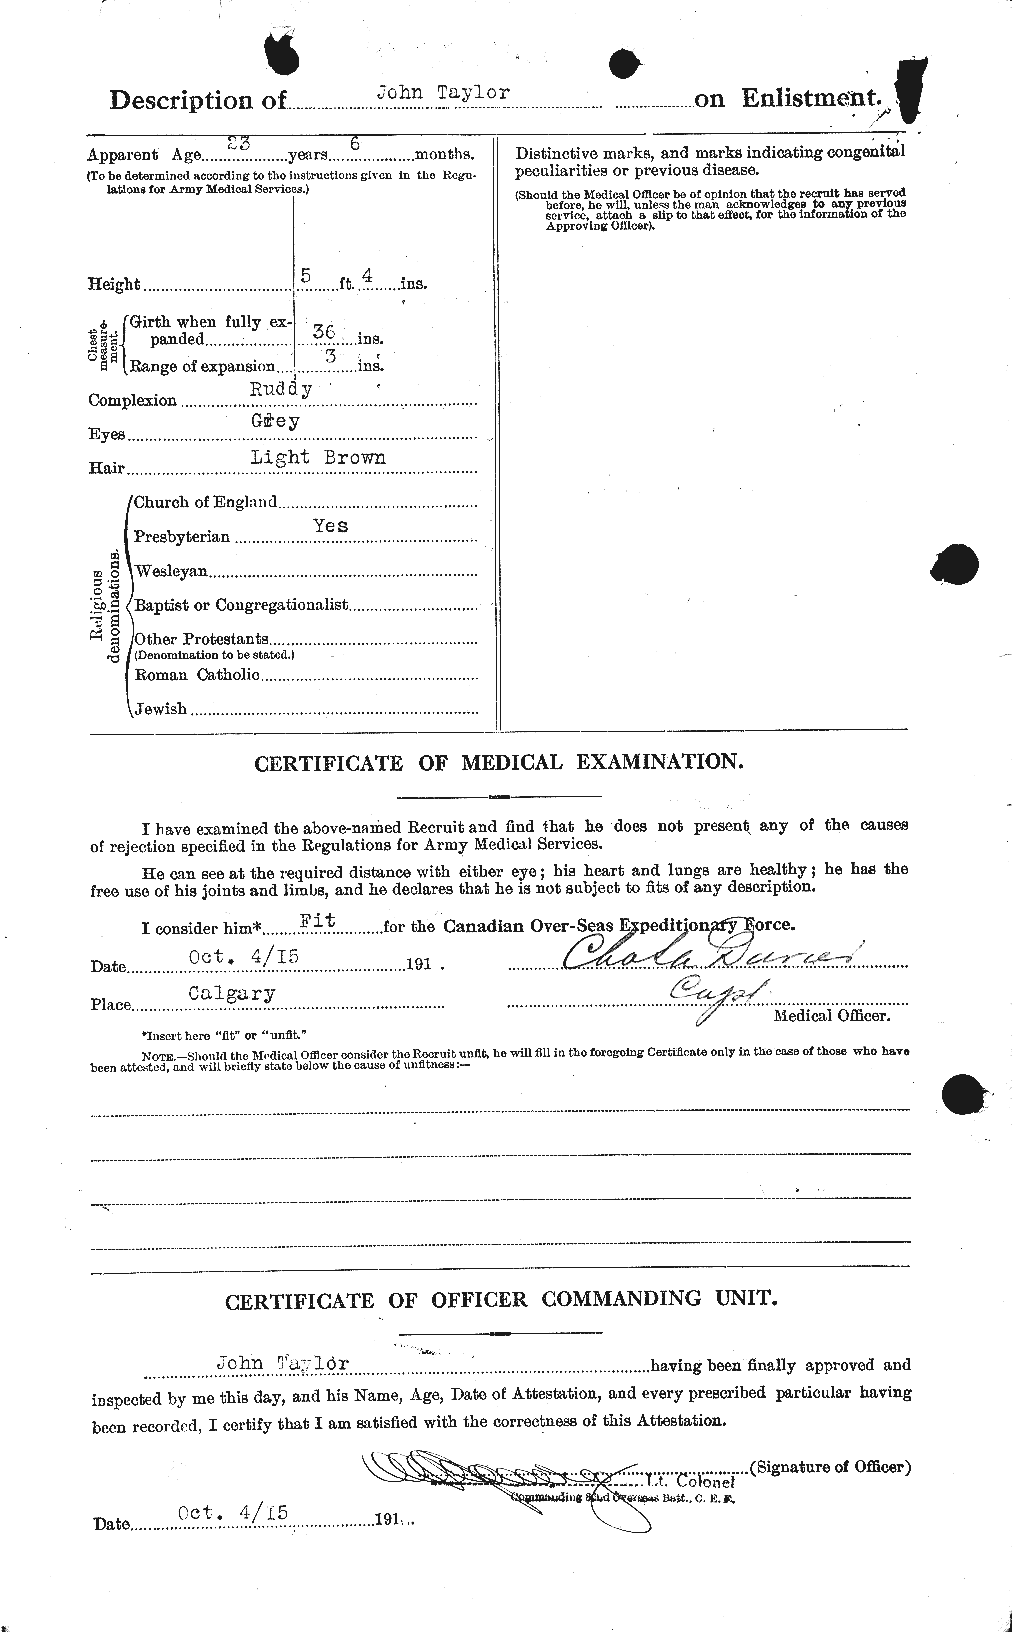 Personnel Records of the First World War - CEF 626973b